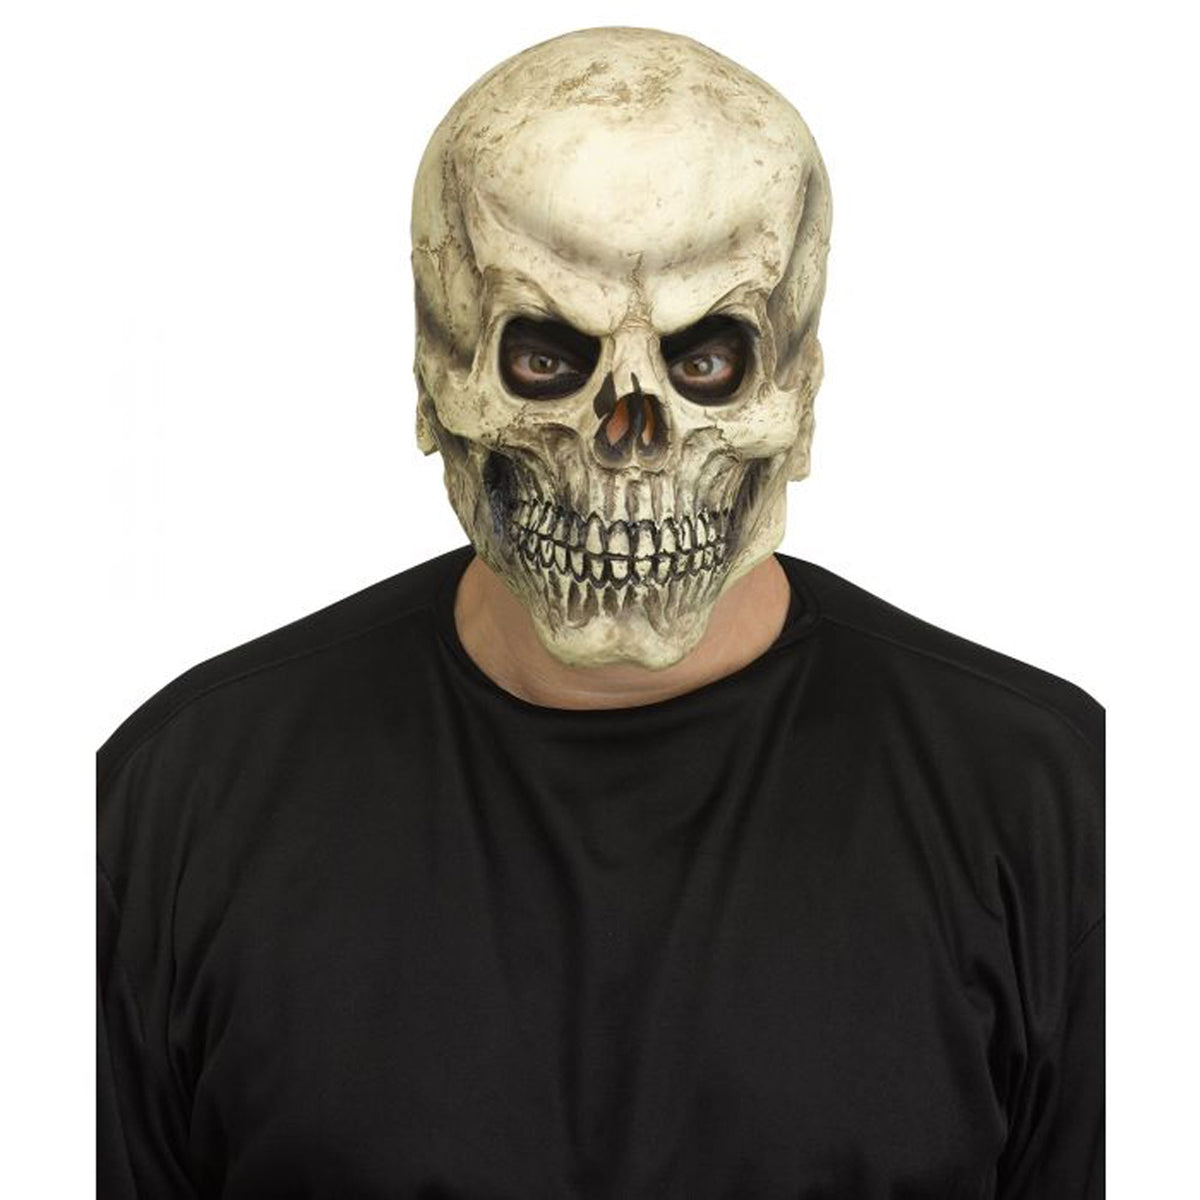 FUN WORLD Costume Accessories Realistic Skull Mask for Adults 071765067355